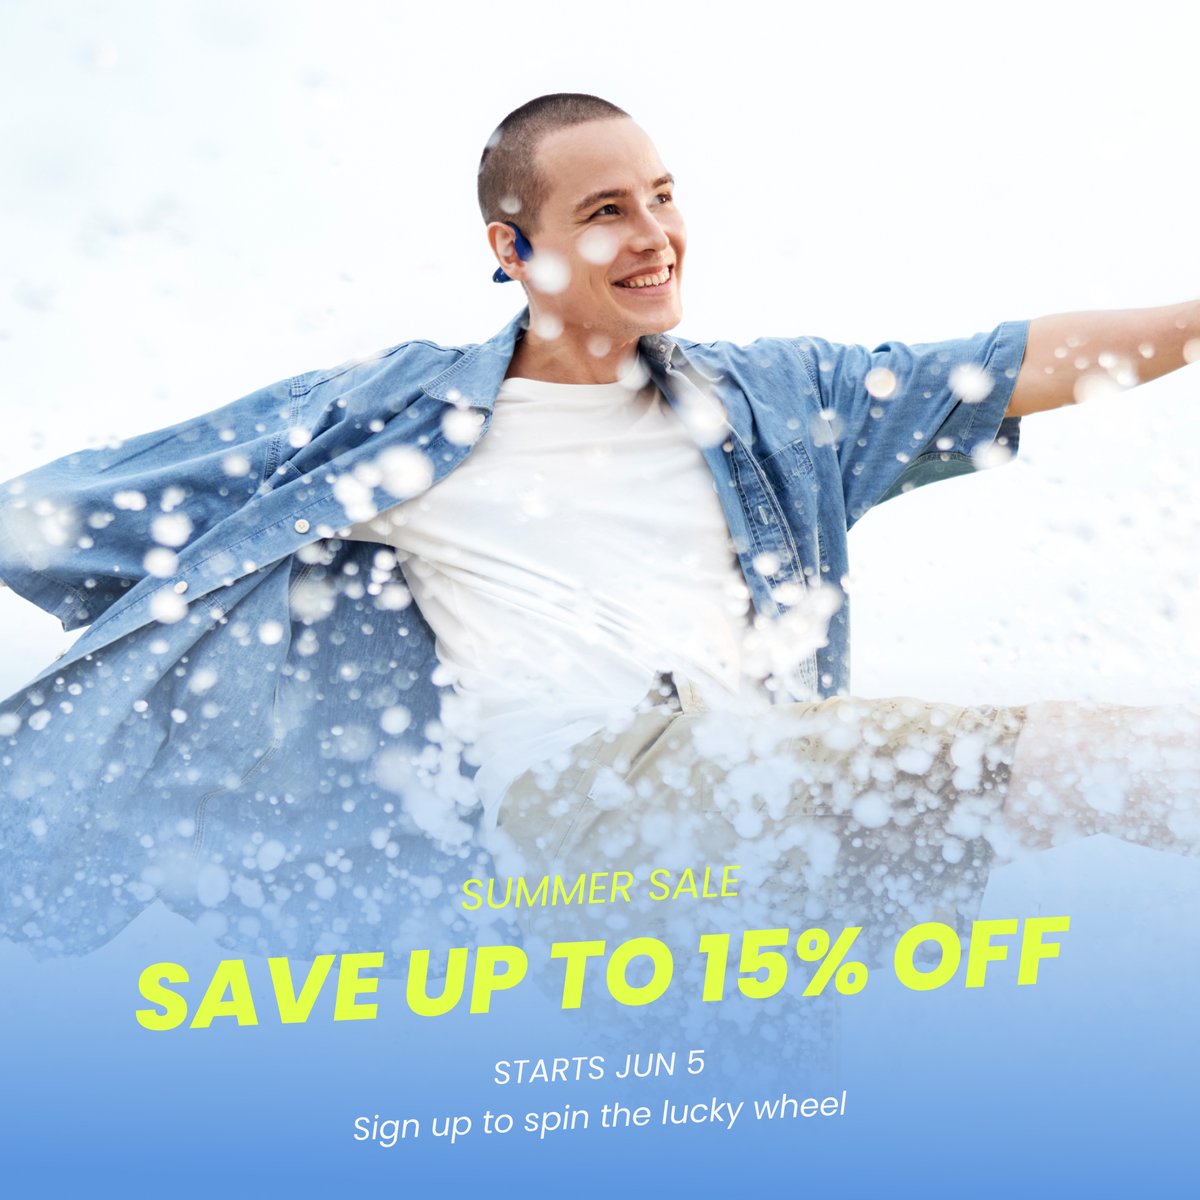 🏄‍♂️Dive into the Ultimate Summer Adventure 🏝️Explore this summer with Shokz best deals 🔥Get 15% off on our headphones and kickstart your summer soundtrack on June 5! uk.shokz.com/pages/2023summ…